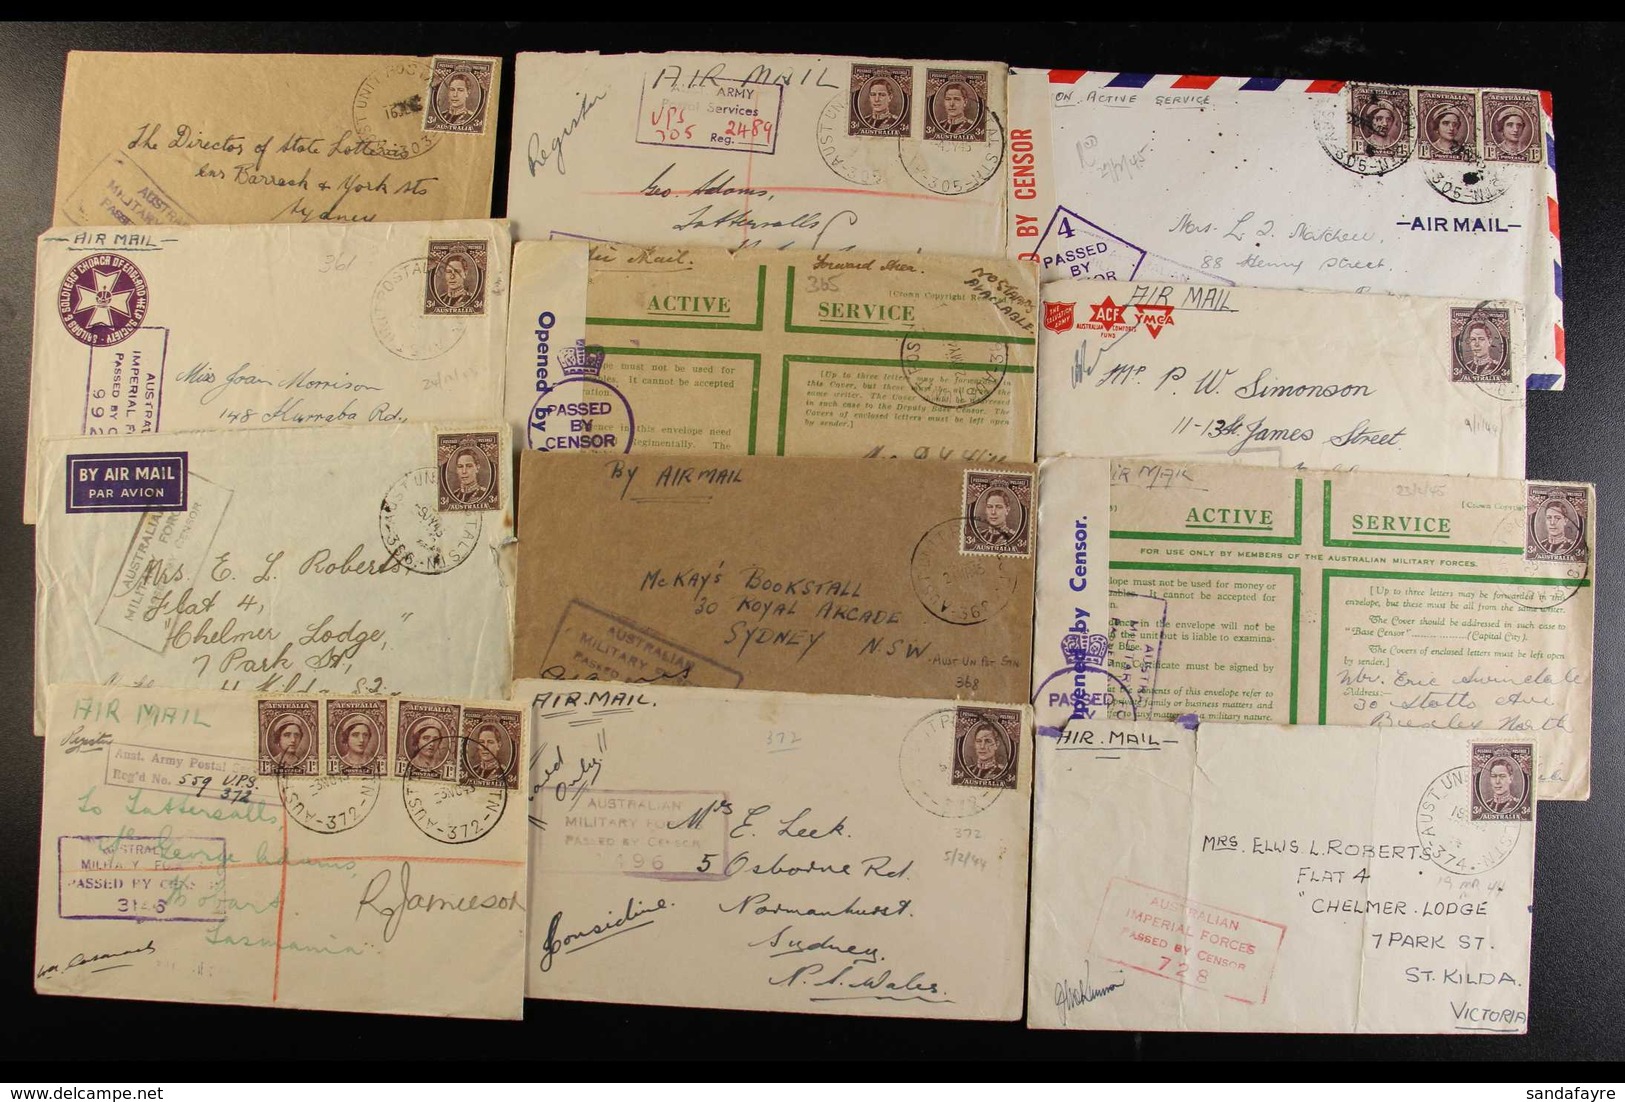 WW2 AUSTRALIAN FORCES - AUST UNIT POSTAL STN DATESTAMPS A Fine Collection Of Covers Back To Australia, Or One To NZ, Bea - Papua-Neuguinea